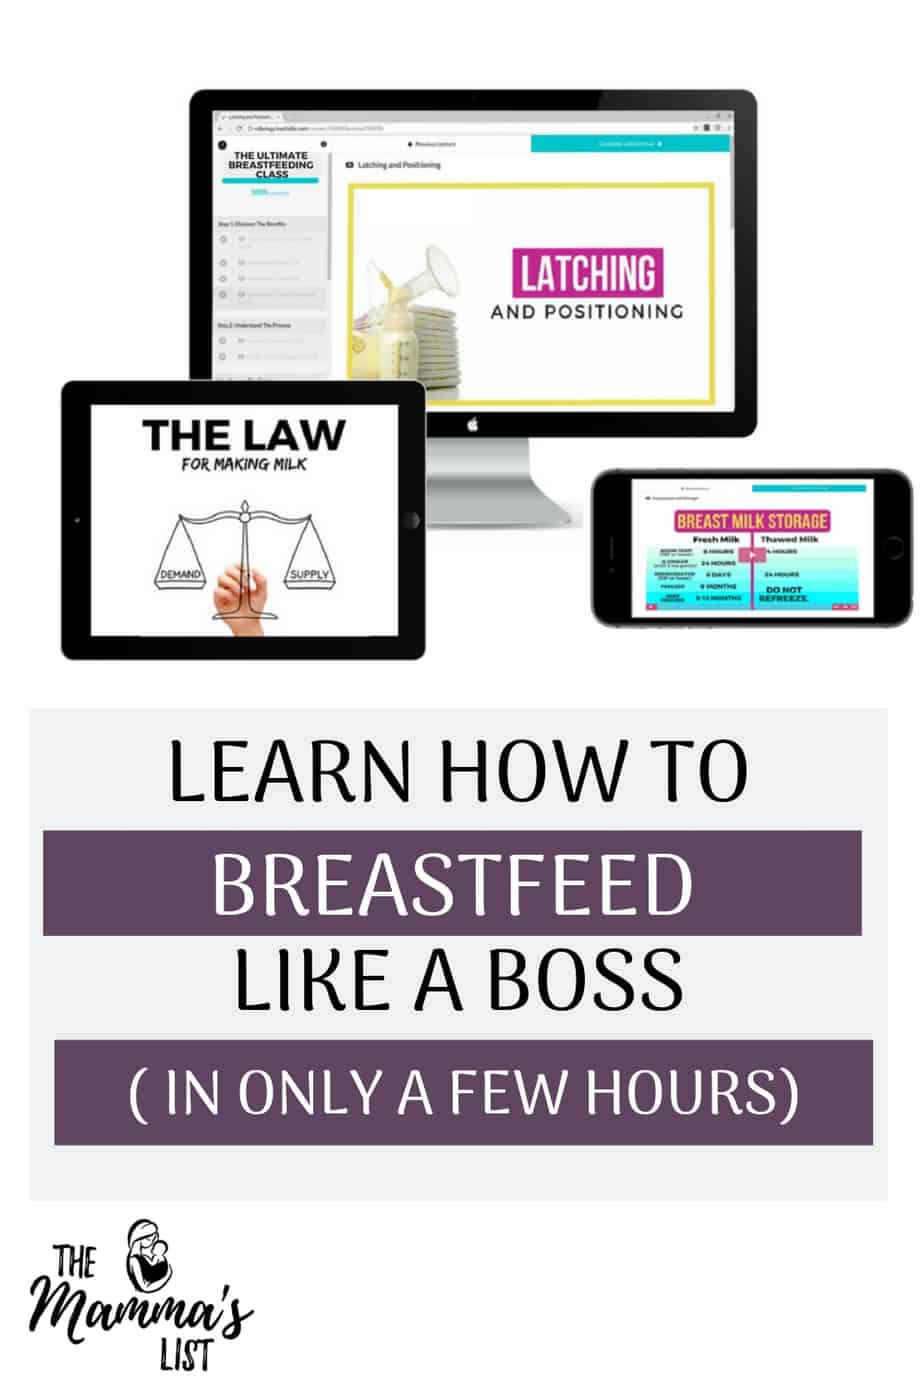 The Milkology Ultimate Breastfeeding Class is an amazing resource guaranteed to have you breastfeeding and pumping like a boss in only 90 minutes. The great news is that you have continued access, so you can reference the videos again after baby arrives! Learning to breastfeed can be a challenge. Check out this great resource for help again and again as you become a new breastfeeding mamma.